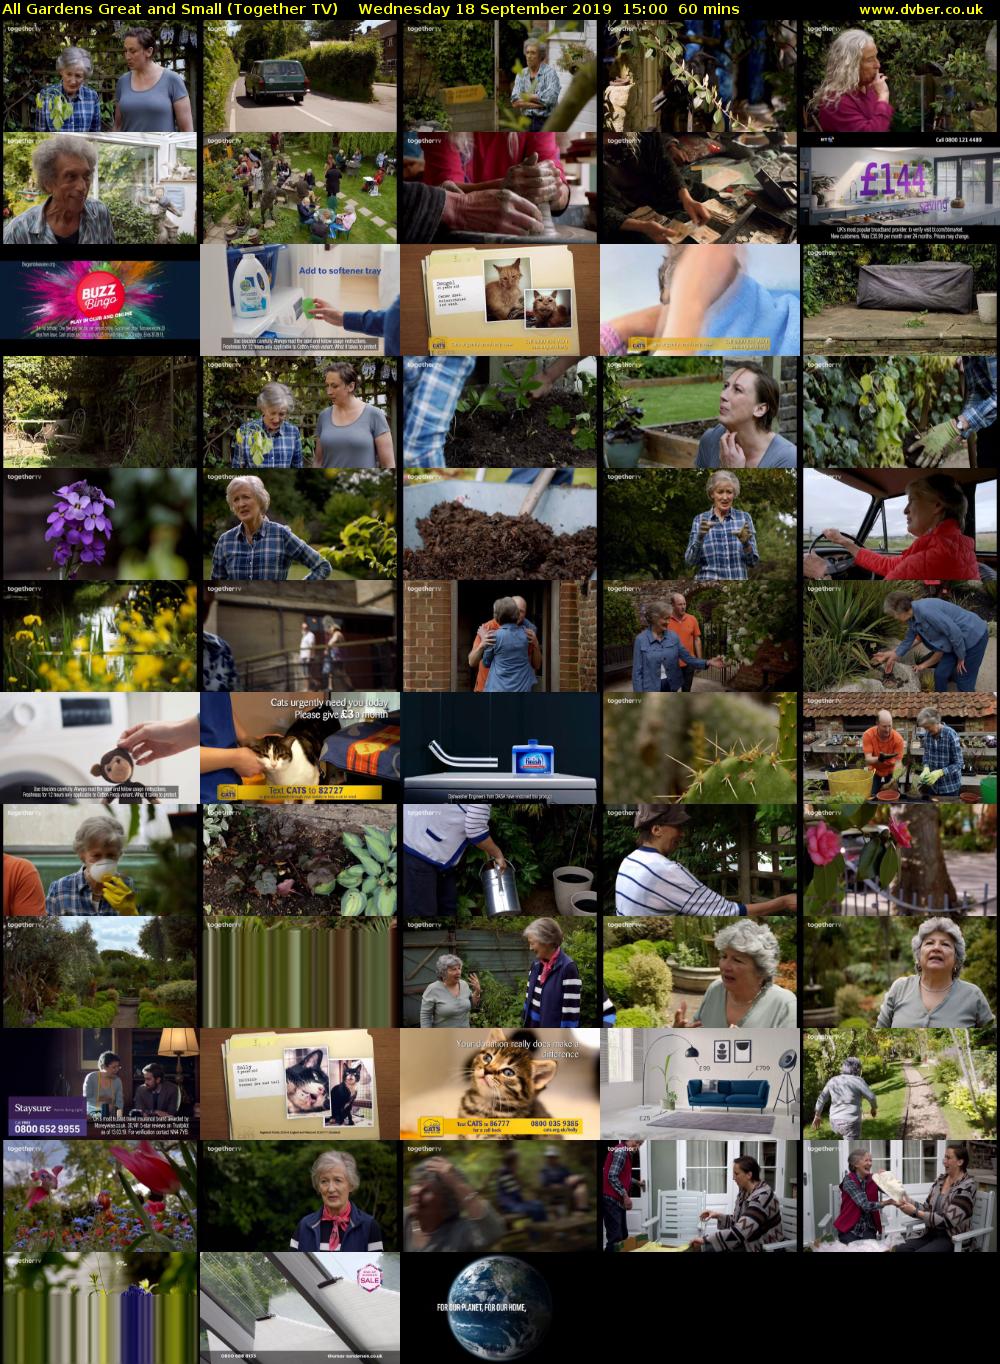 All Gardens Great and Small (Together TV) Wednesday 18 September 2019 15:00 - 16:00